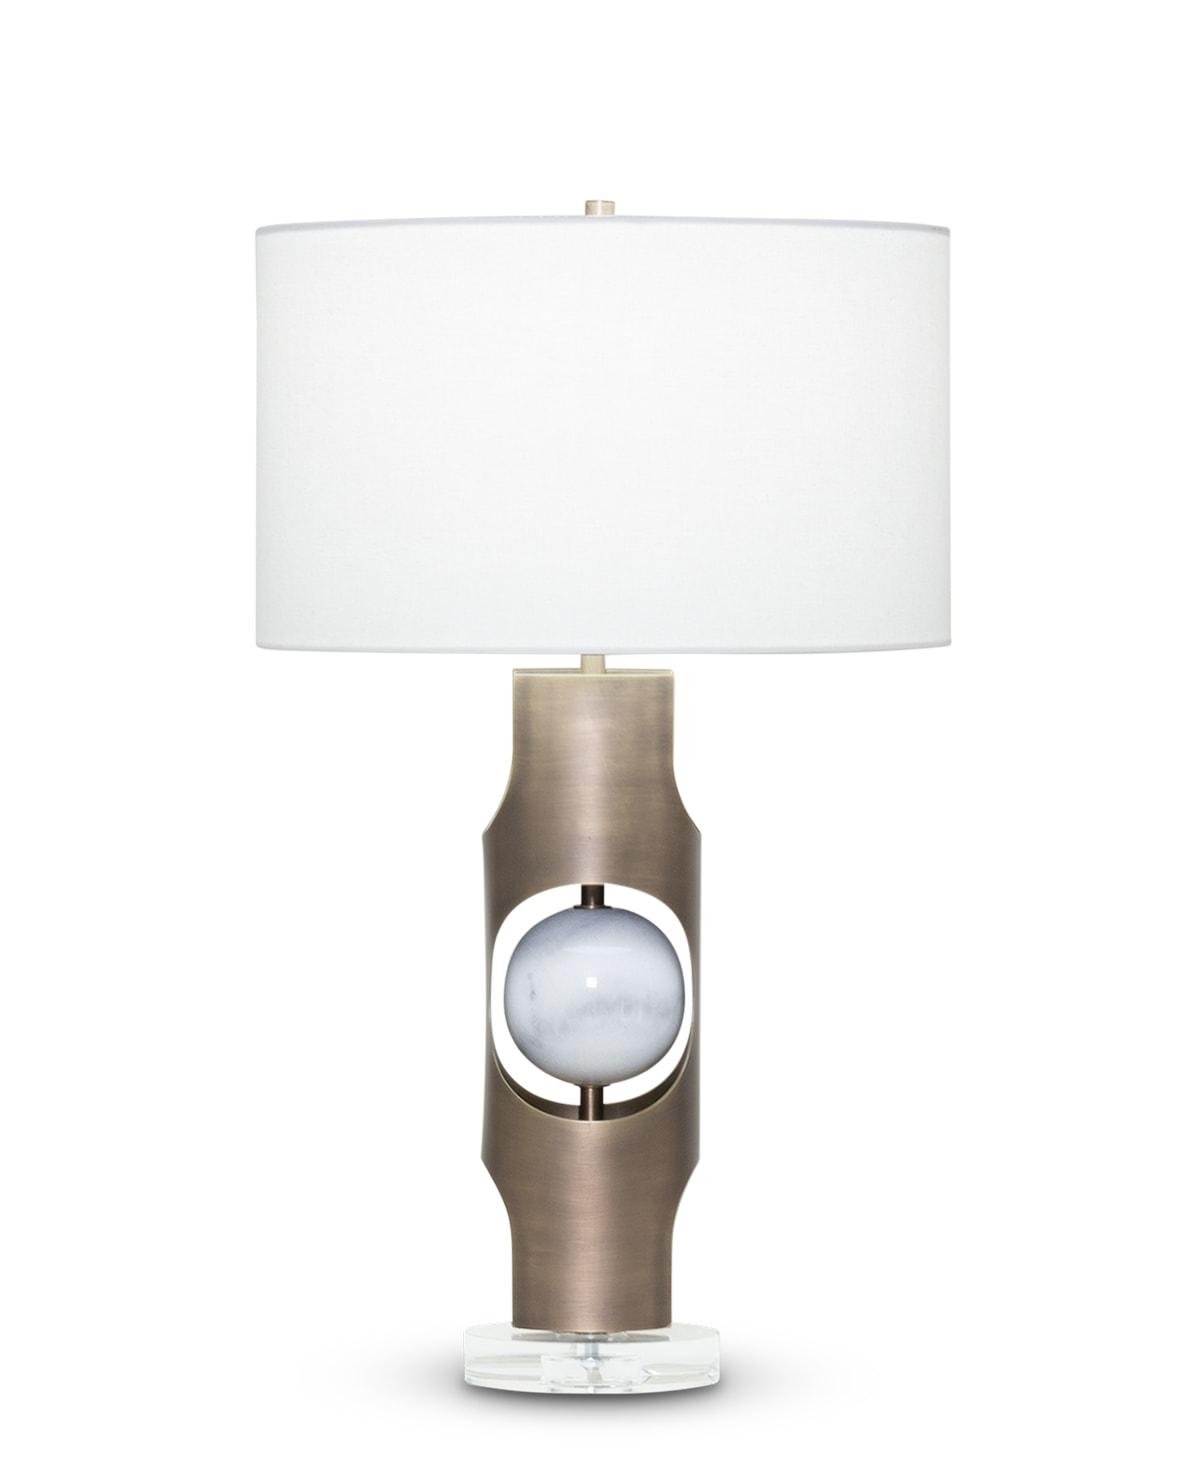 FlowDecor Eleanor Table Lamp in metal with antique brass finish and white marble and crystal base and off-white linen drum shade (# 3943)